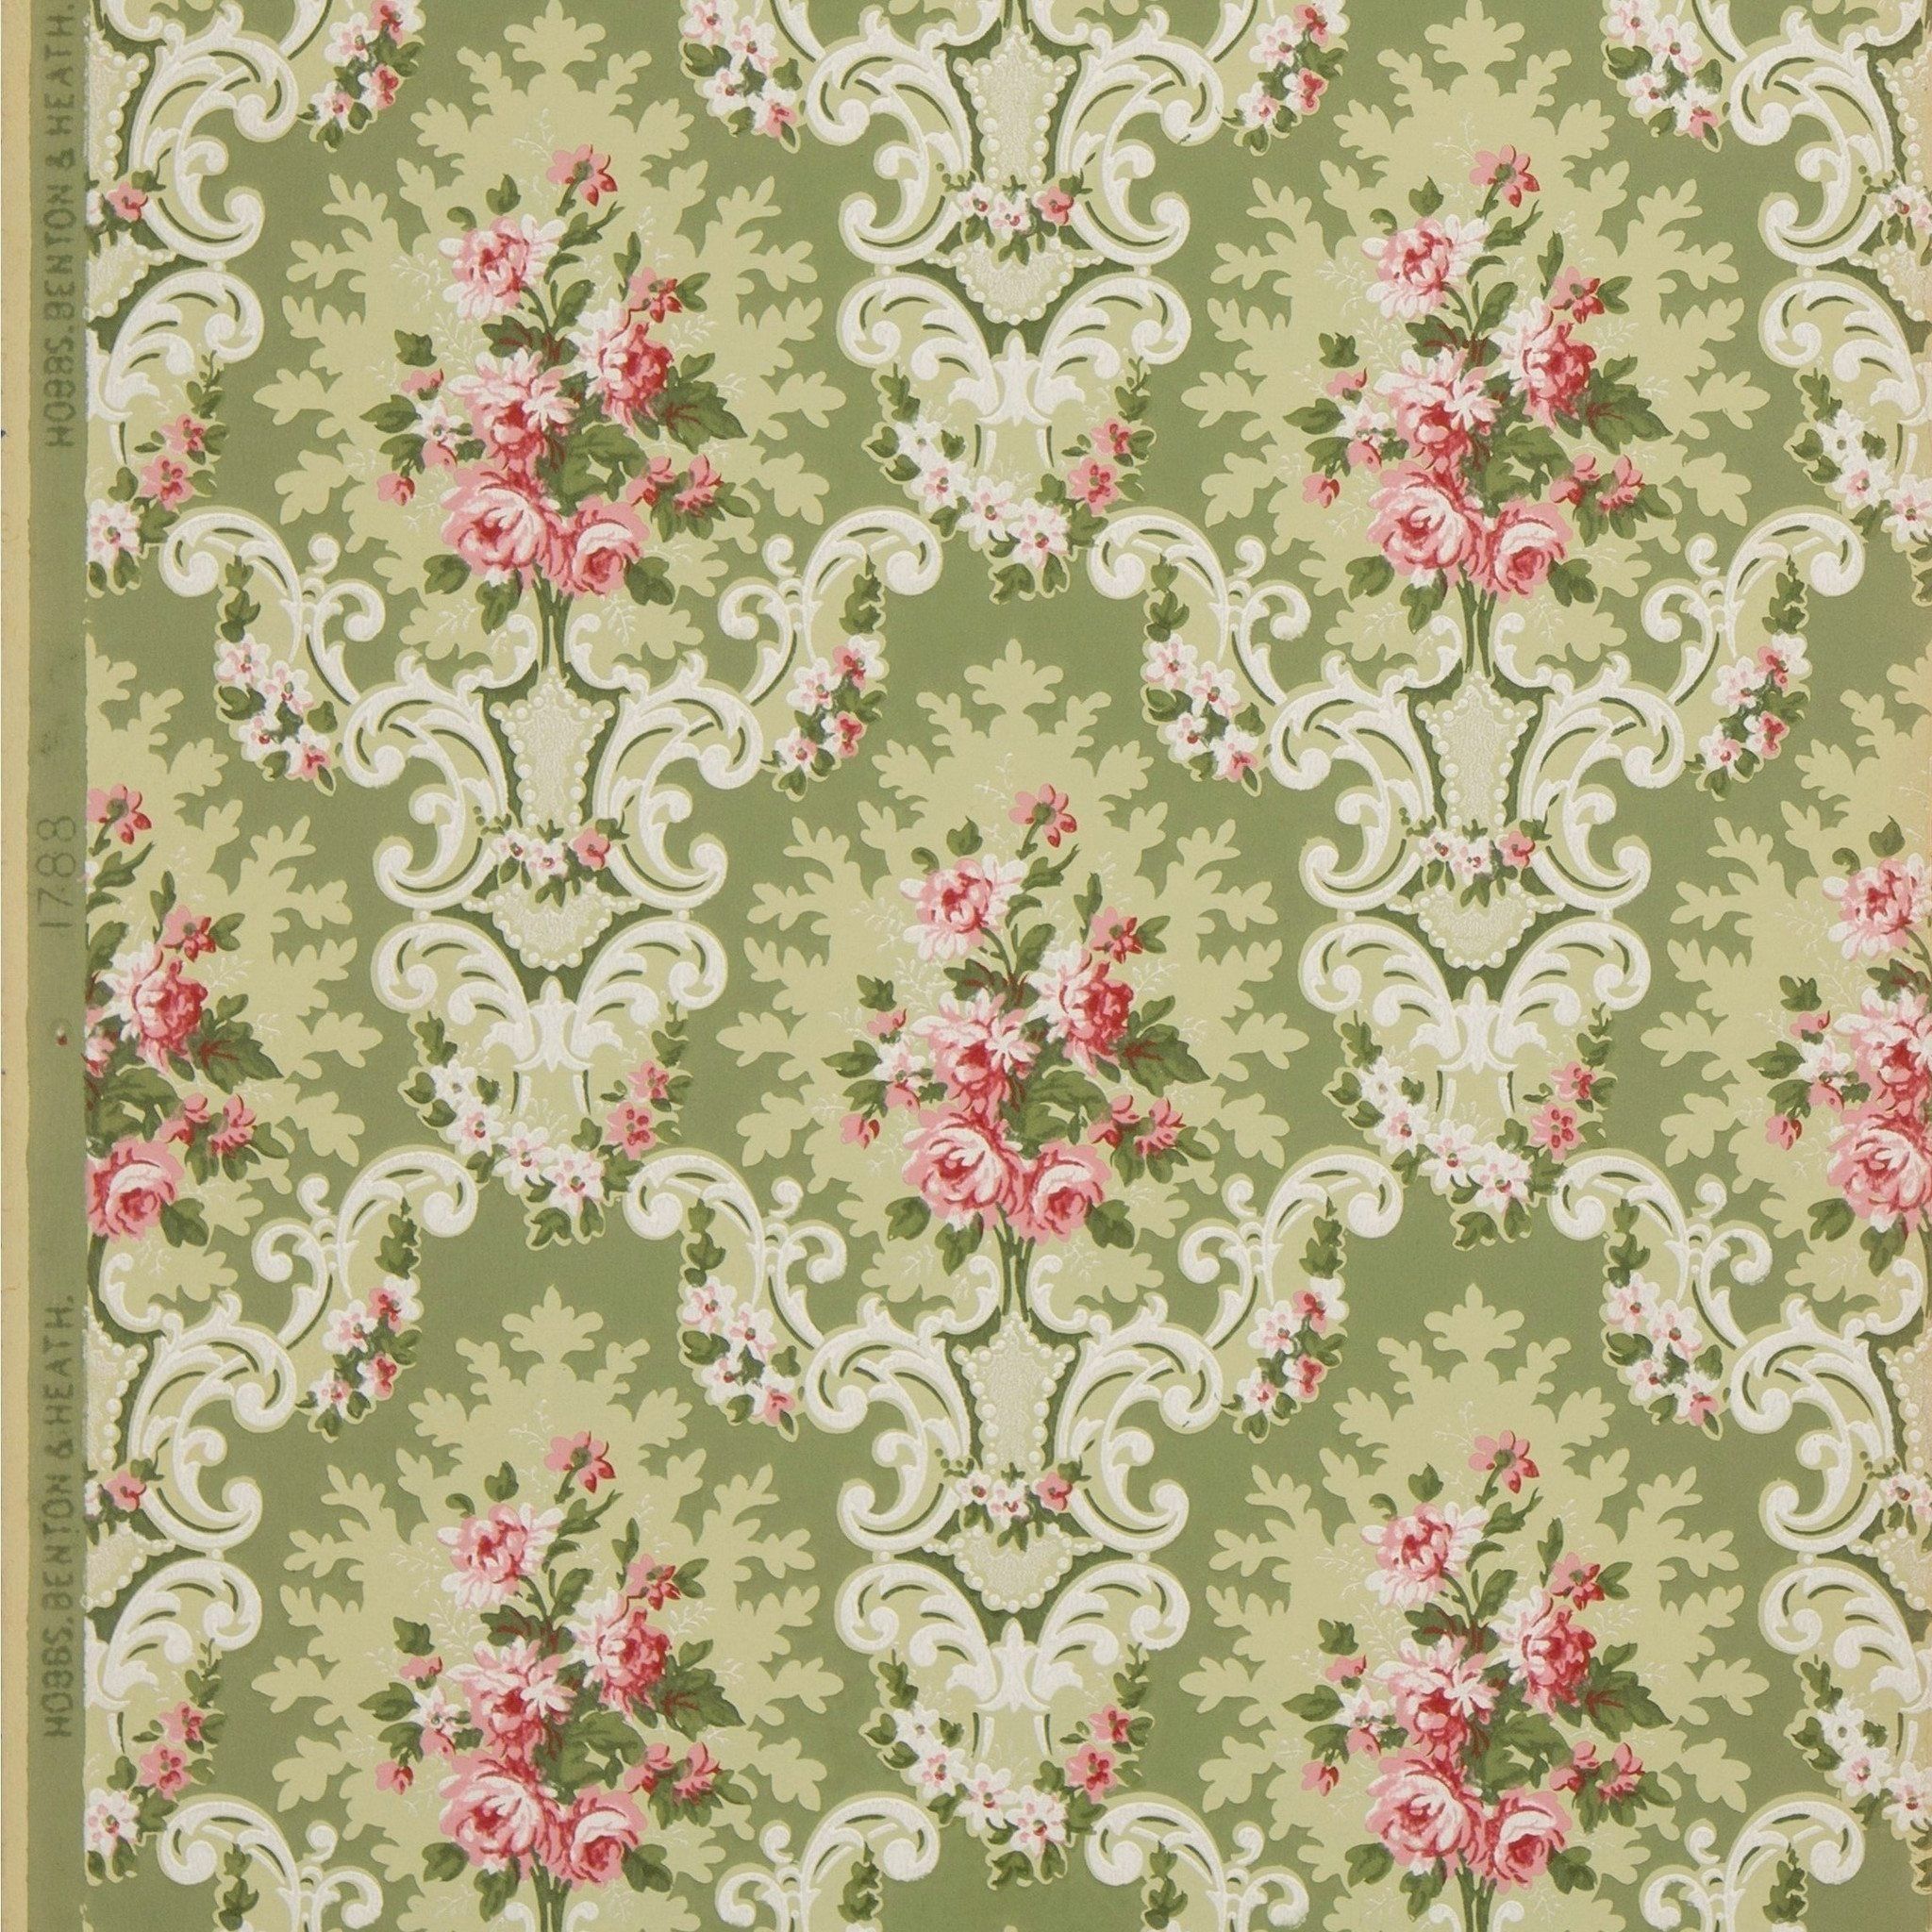 Rose Clusters in Rococo Cartouches Wallpaper Remnant